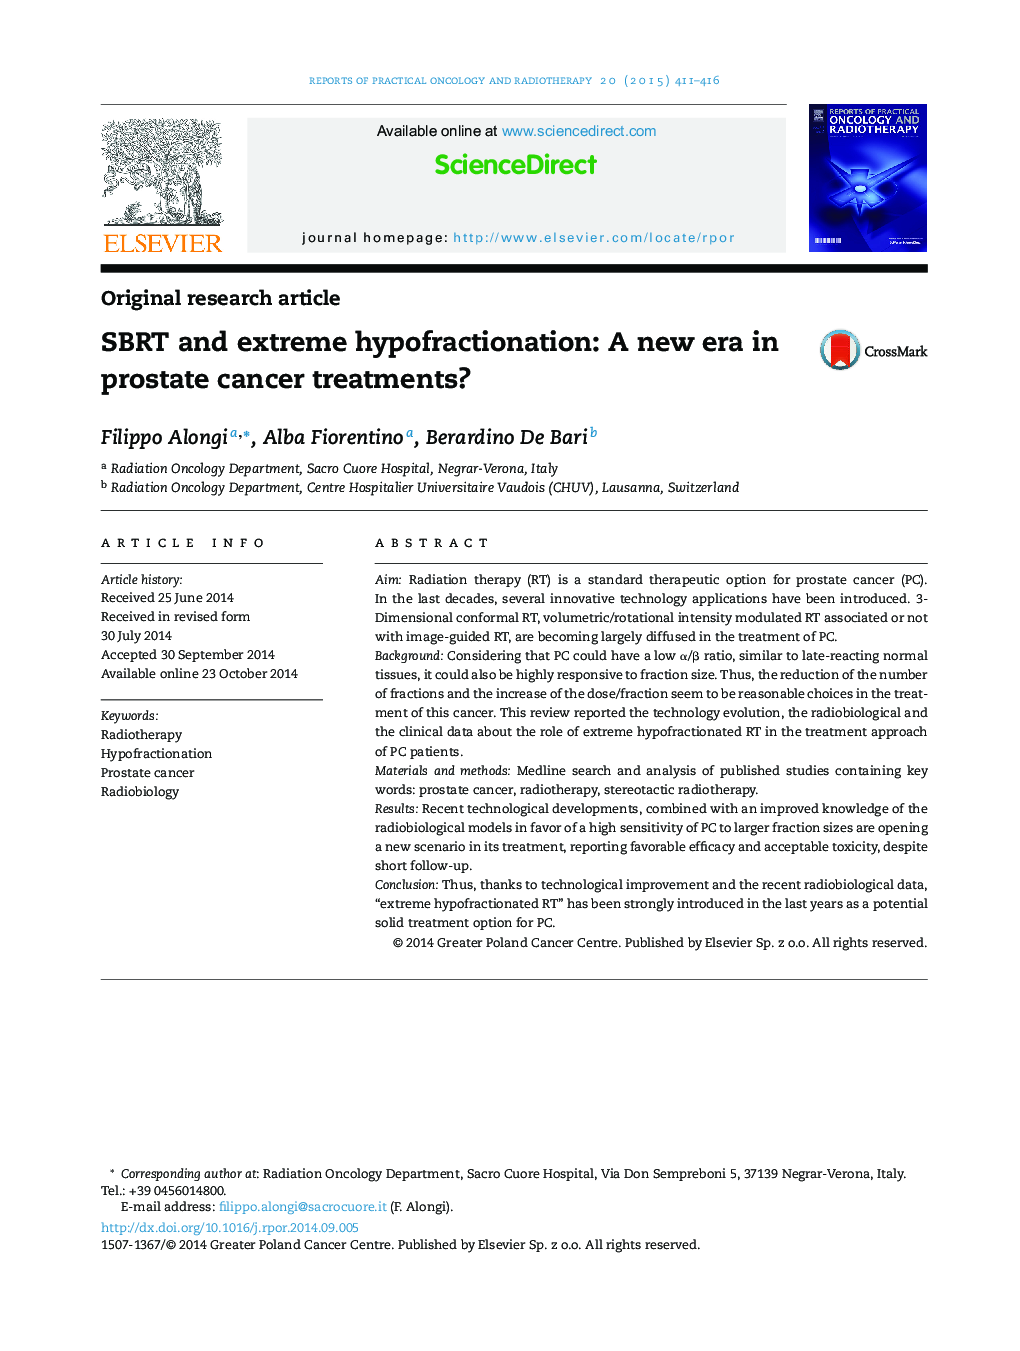 SBRT and extreme hypofractionation: A new era in prostate cancer treatments?